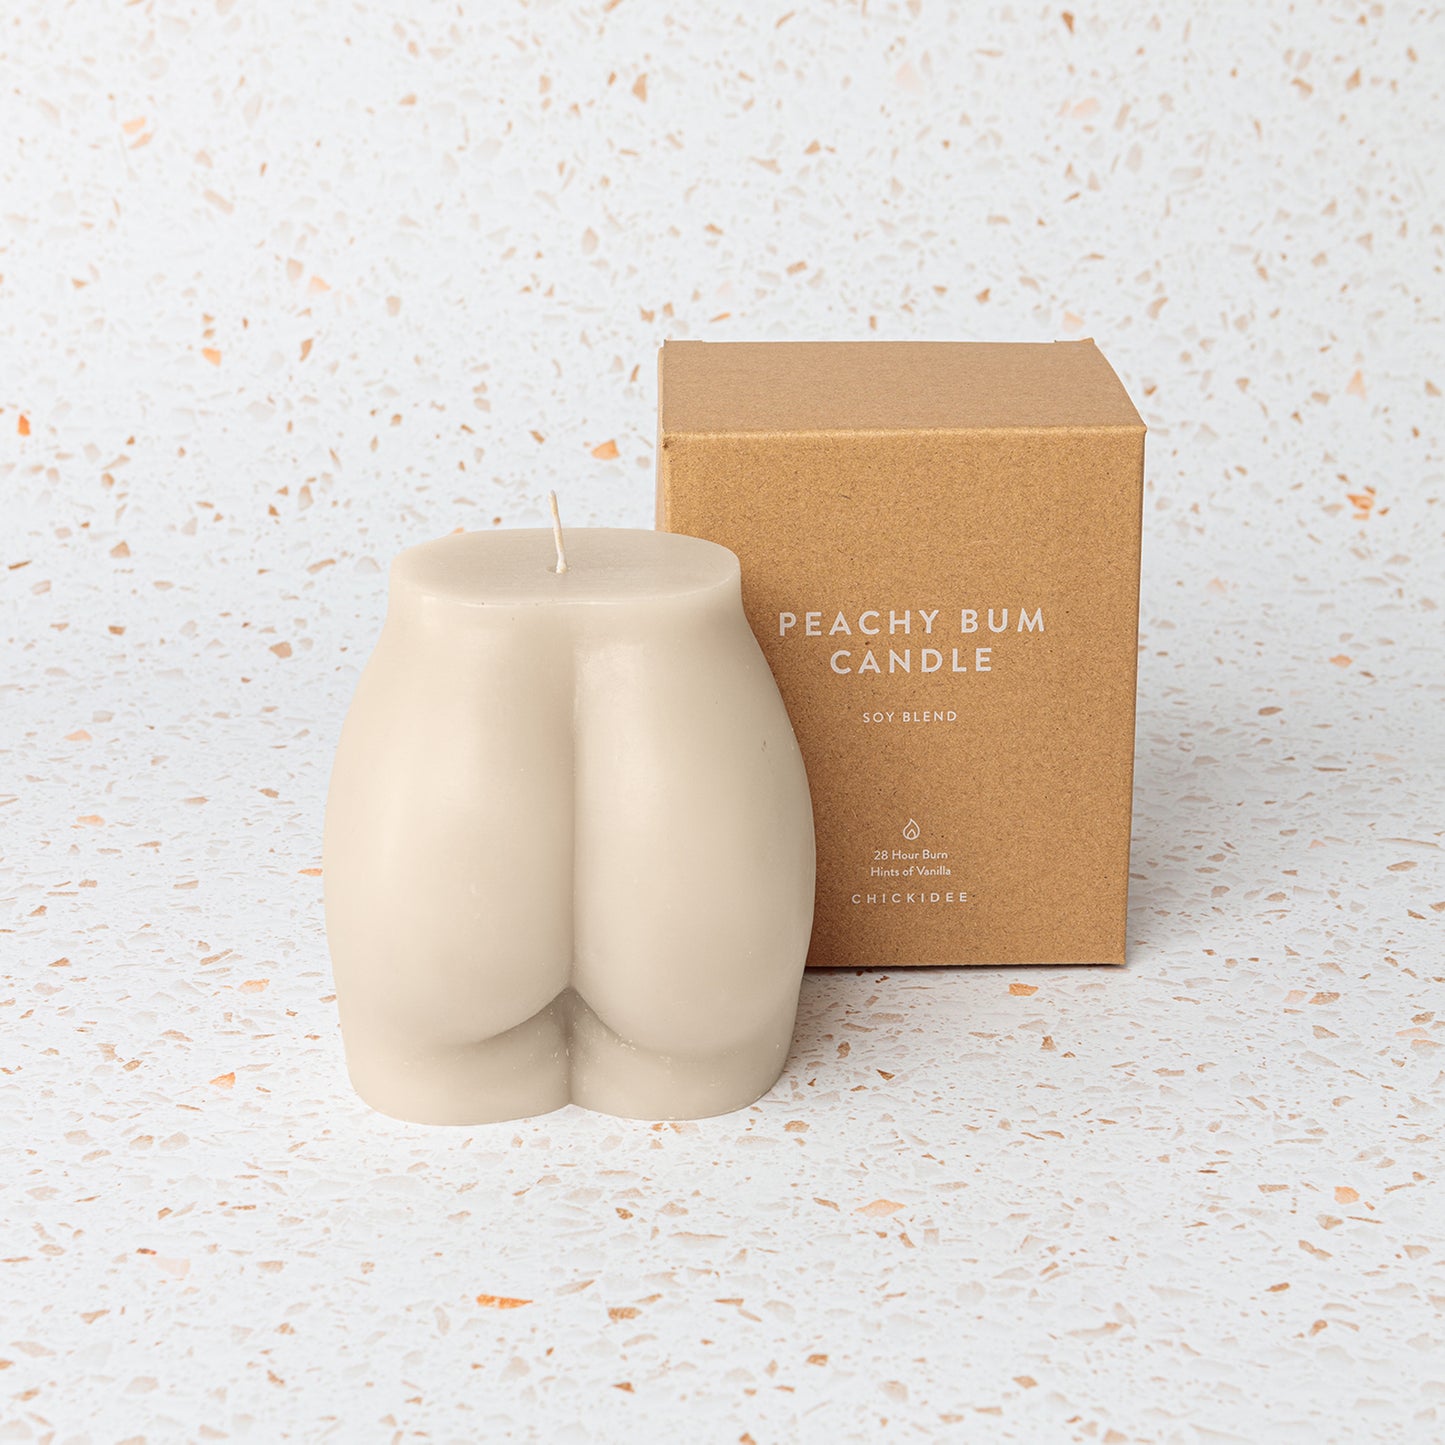 Peachy Bum Candle – Chickidee